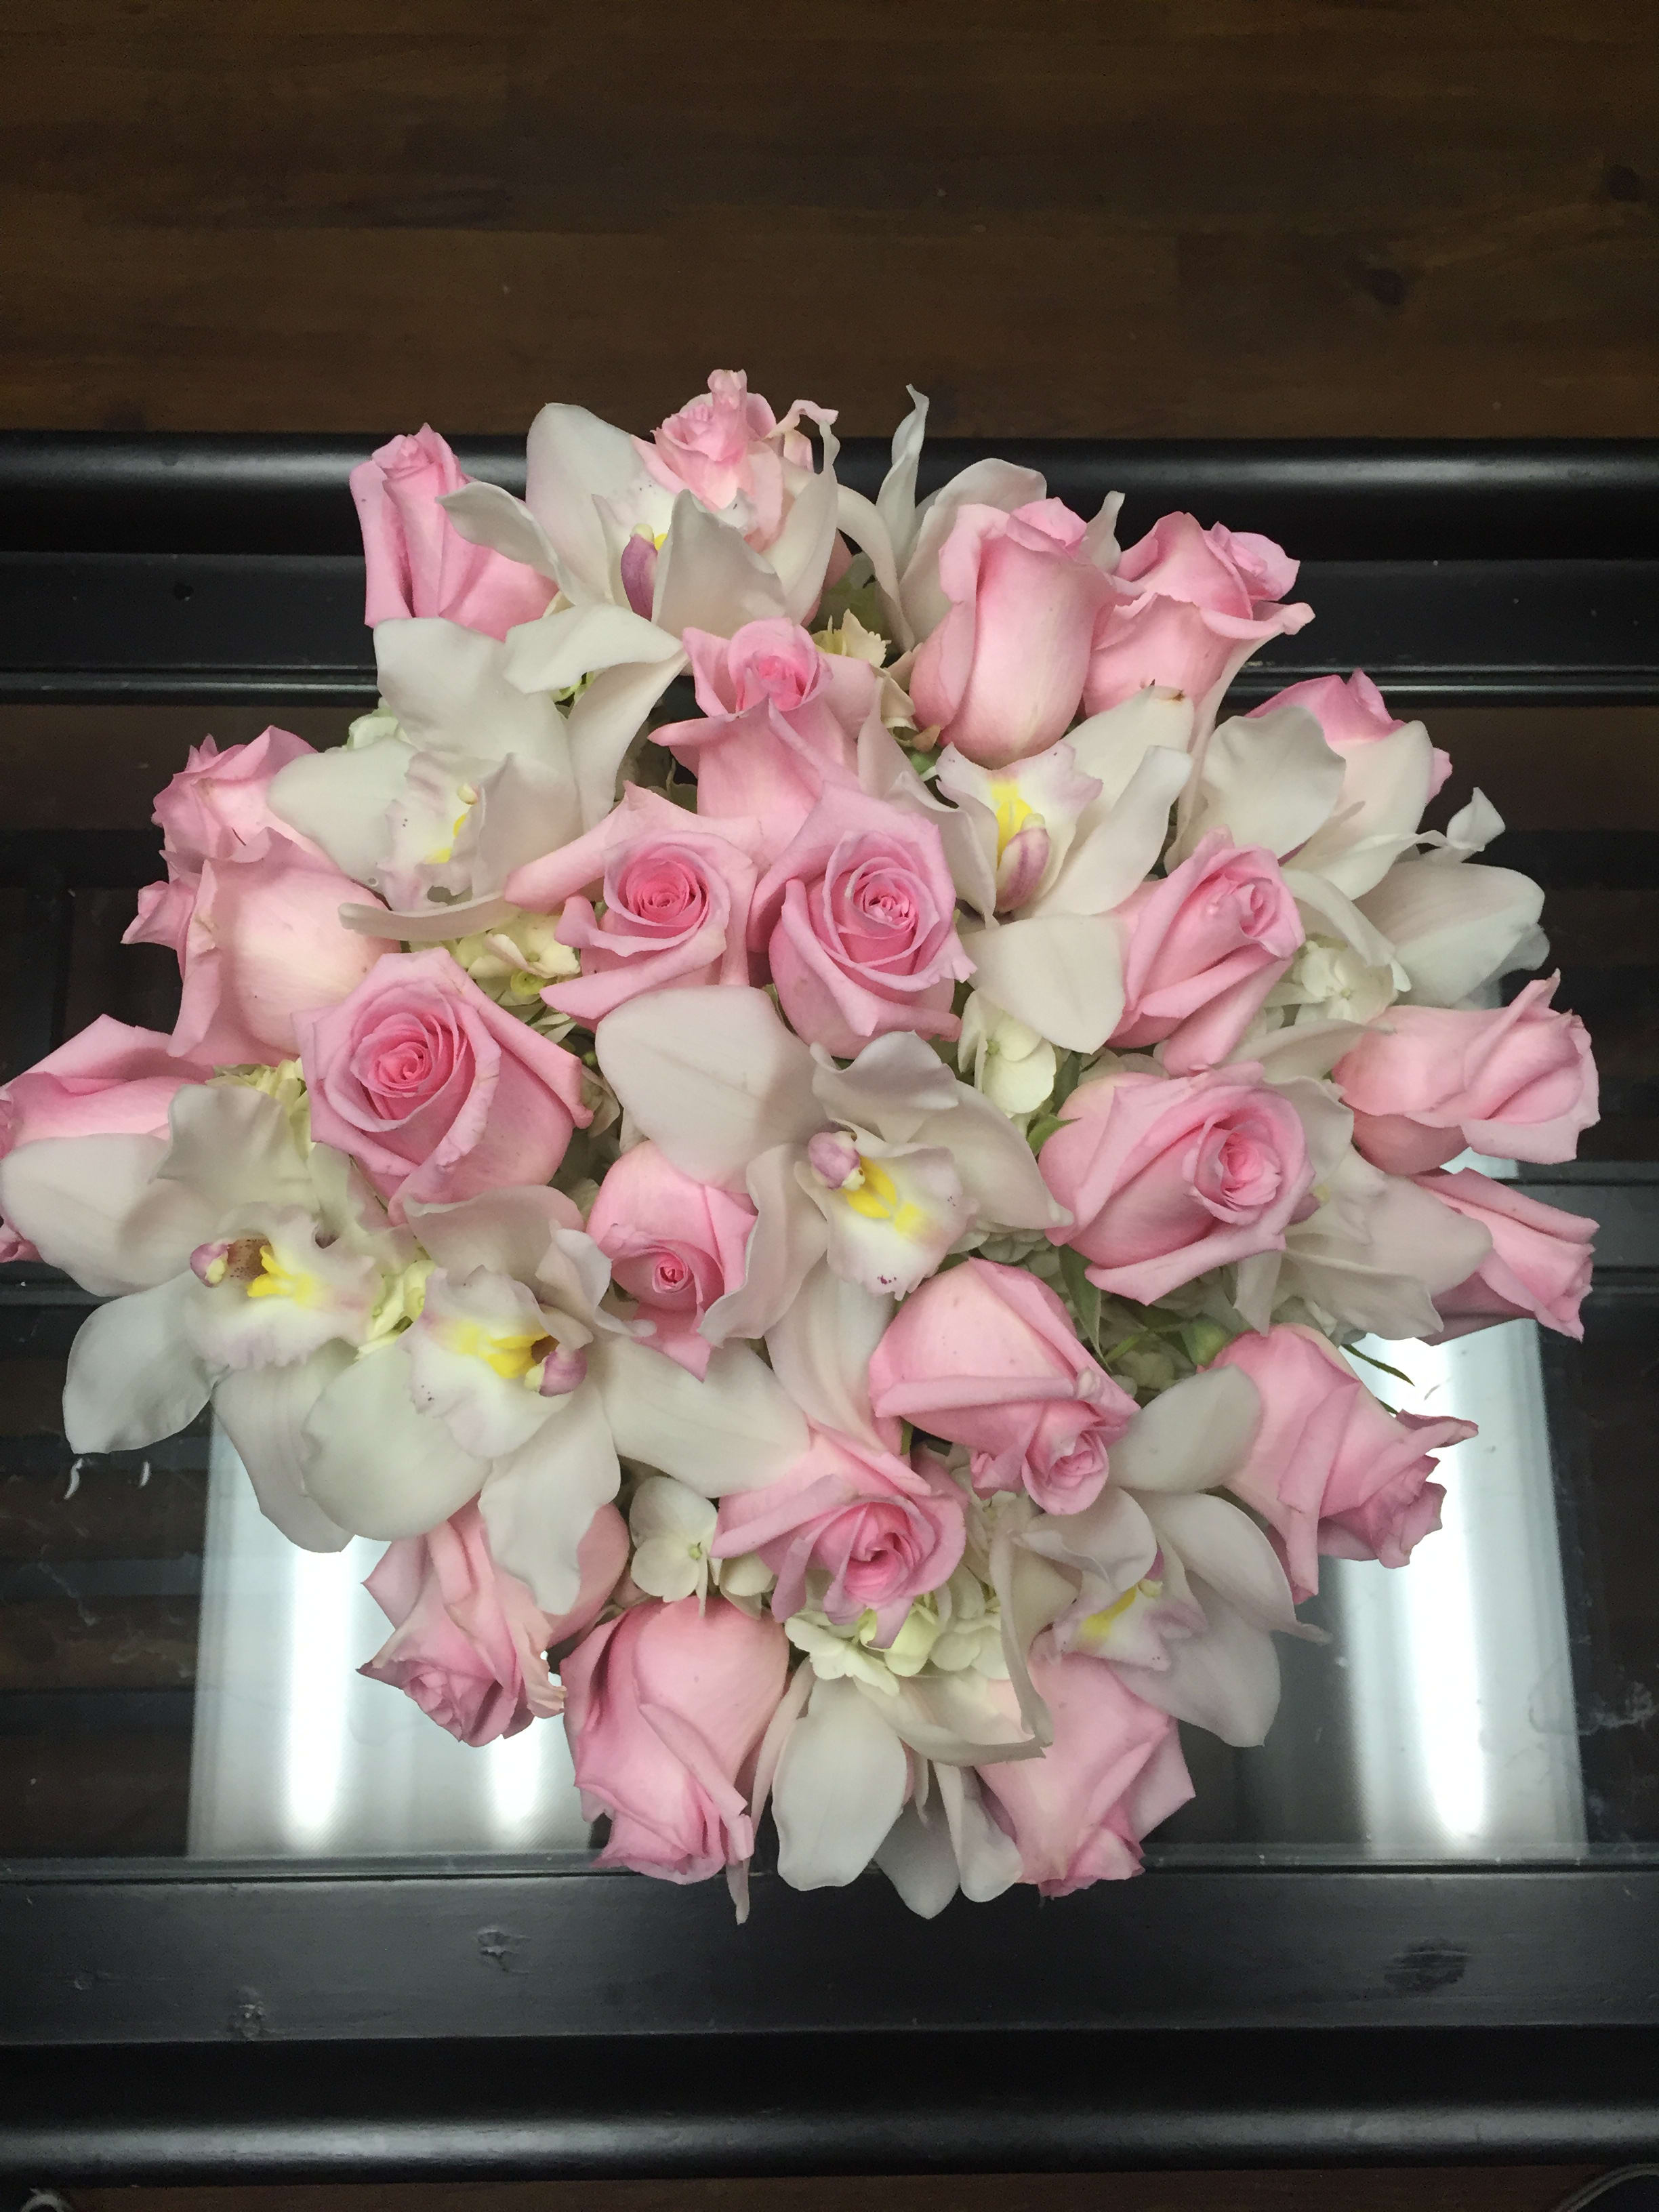 2 doz soft pink roses and white orchids  - Low full design of 2 doz soft pink roses and white orchids 3 doz roses and 4 doz